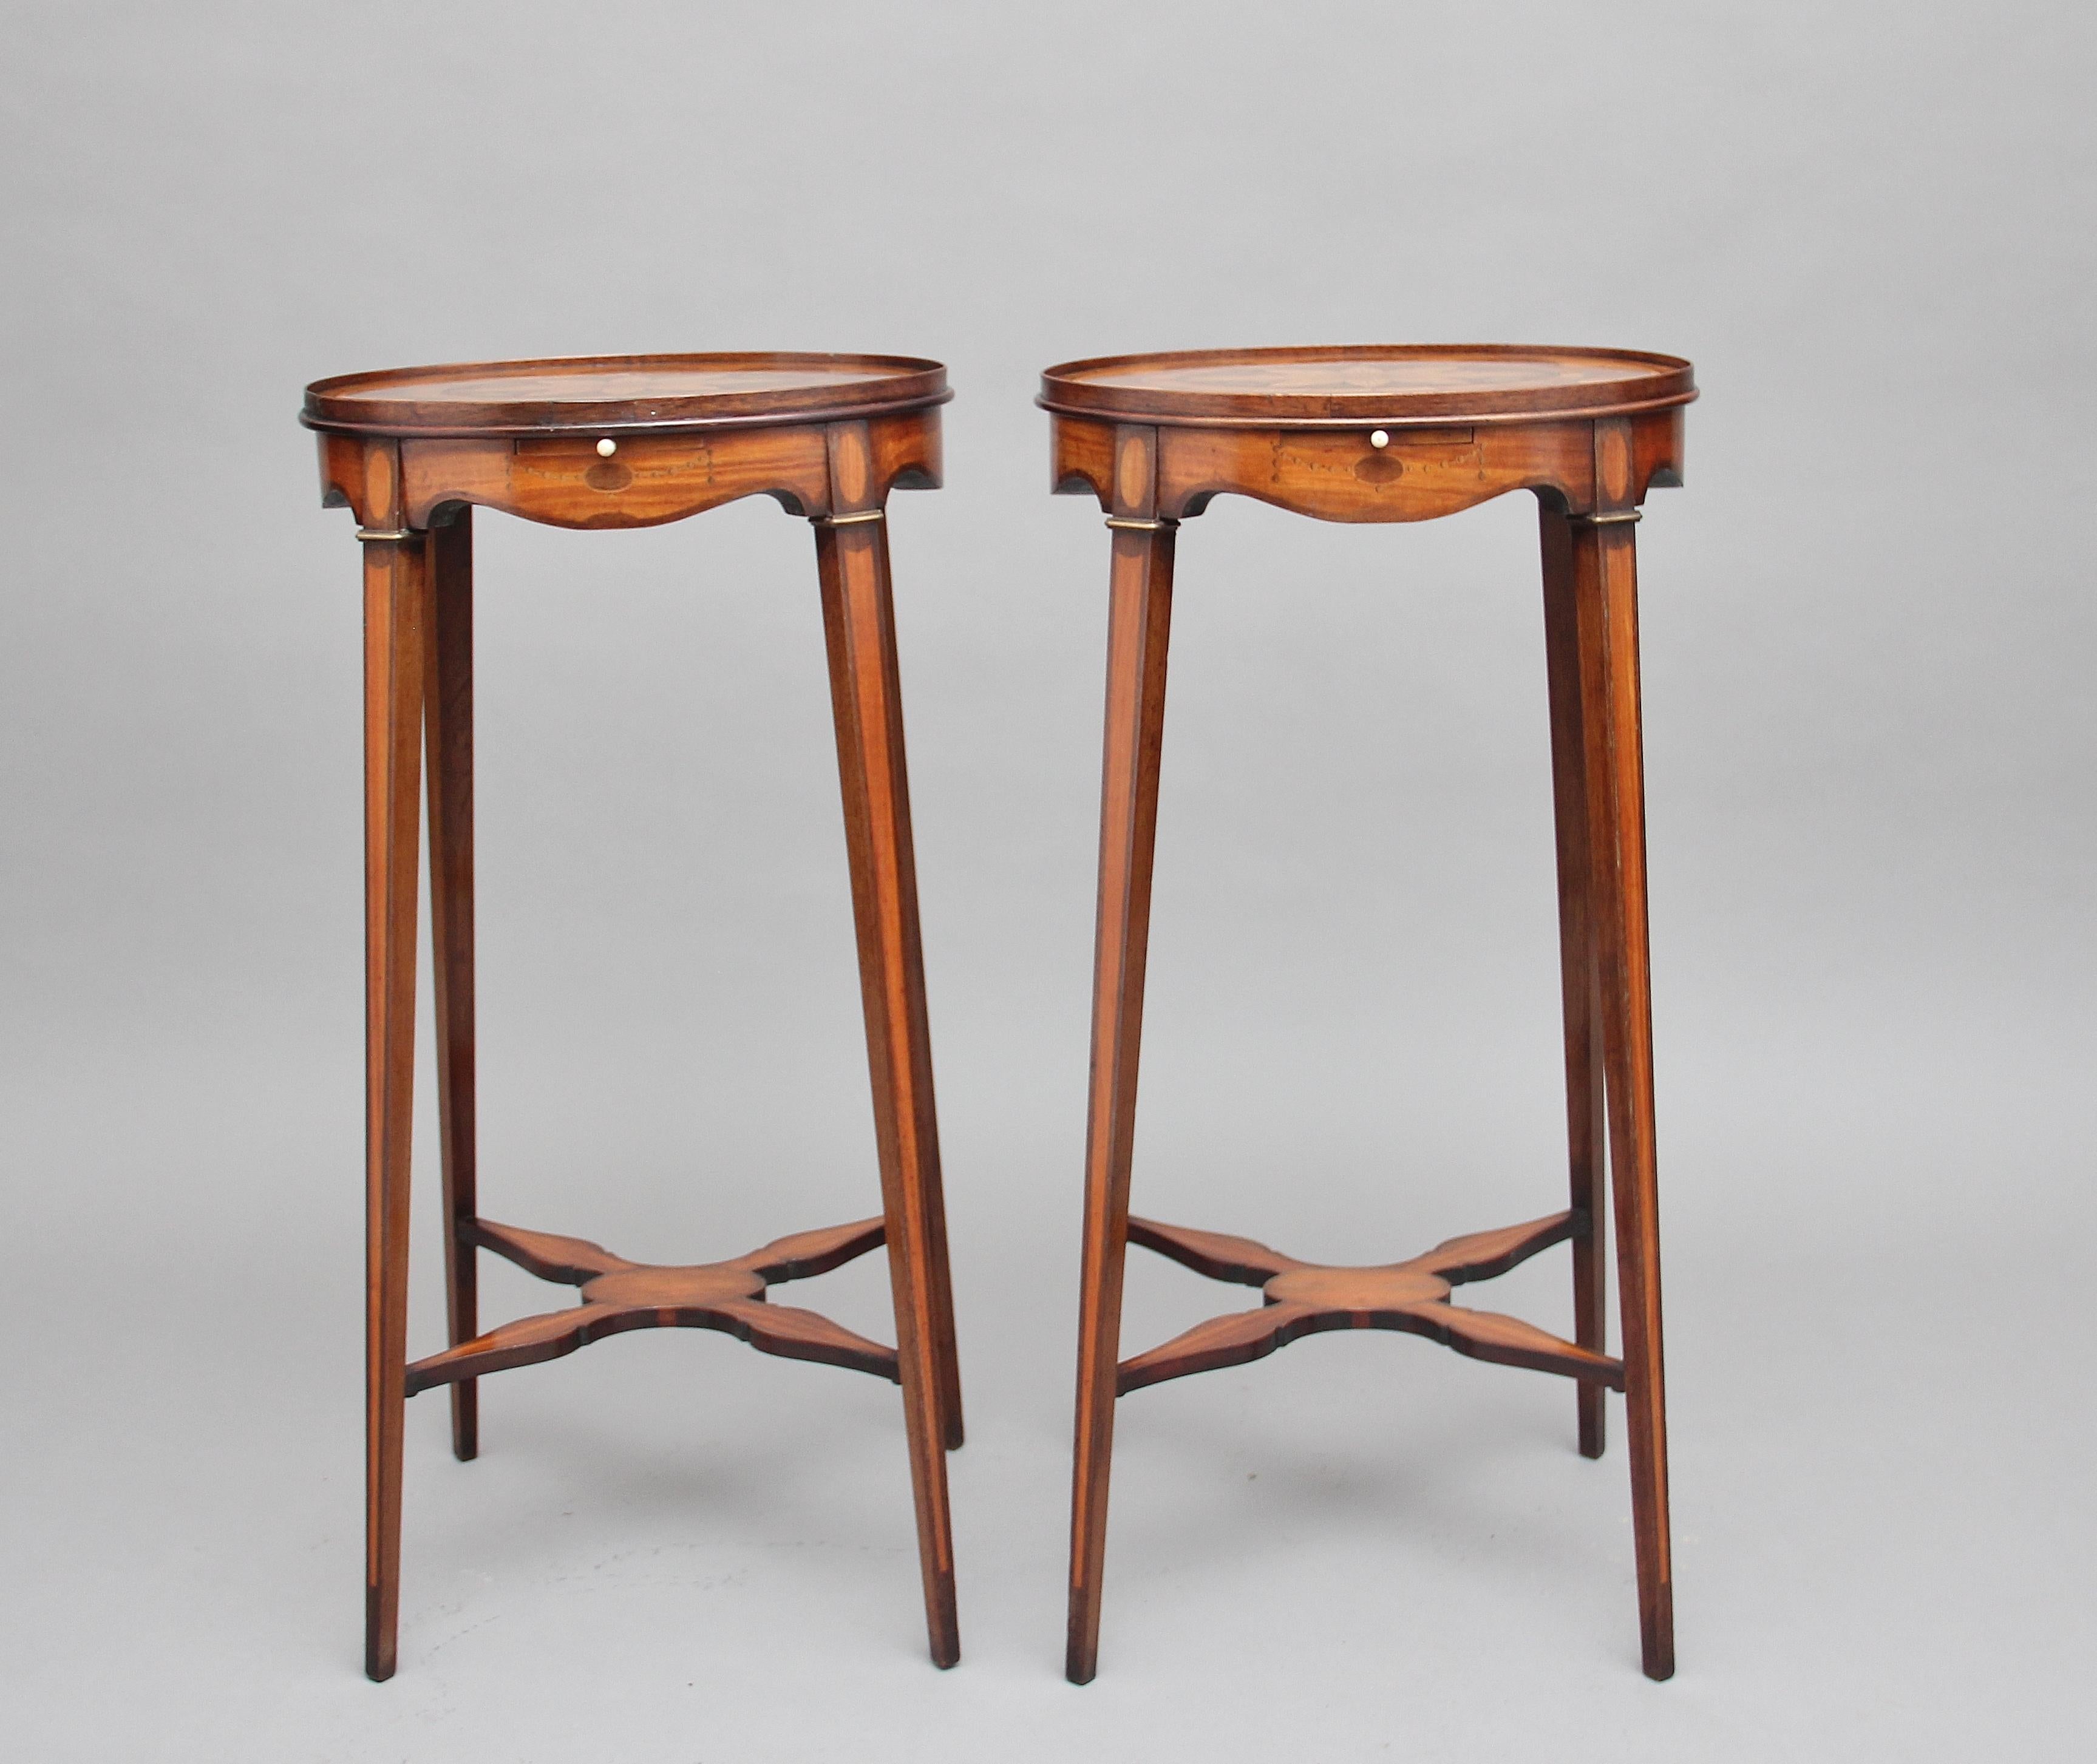 Pair of Sheraton Revival Mahogany and Inlaid Urn Stands For Sale 2